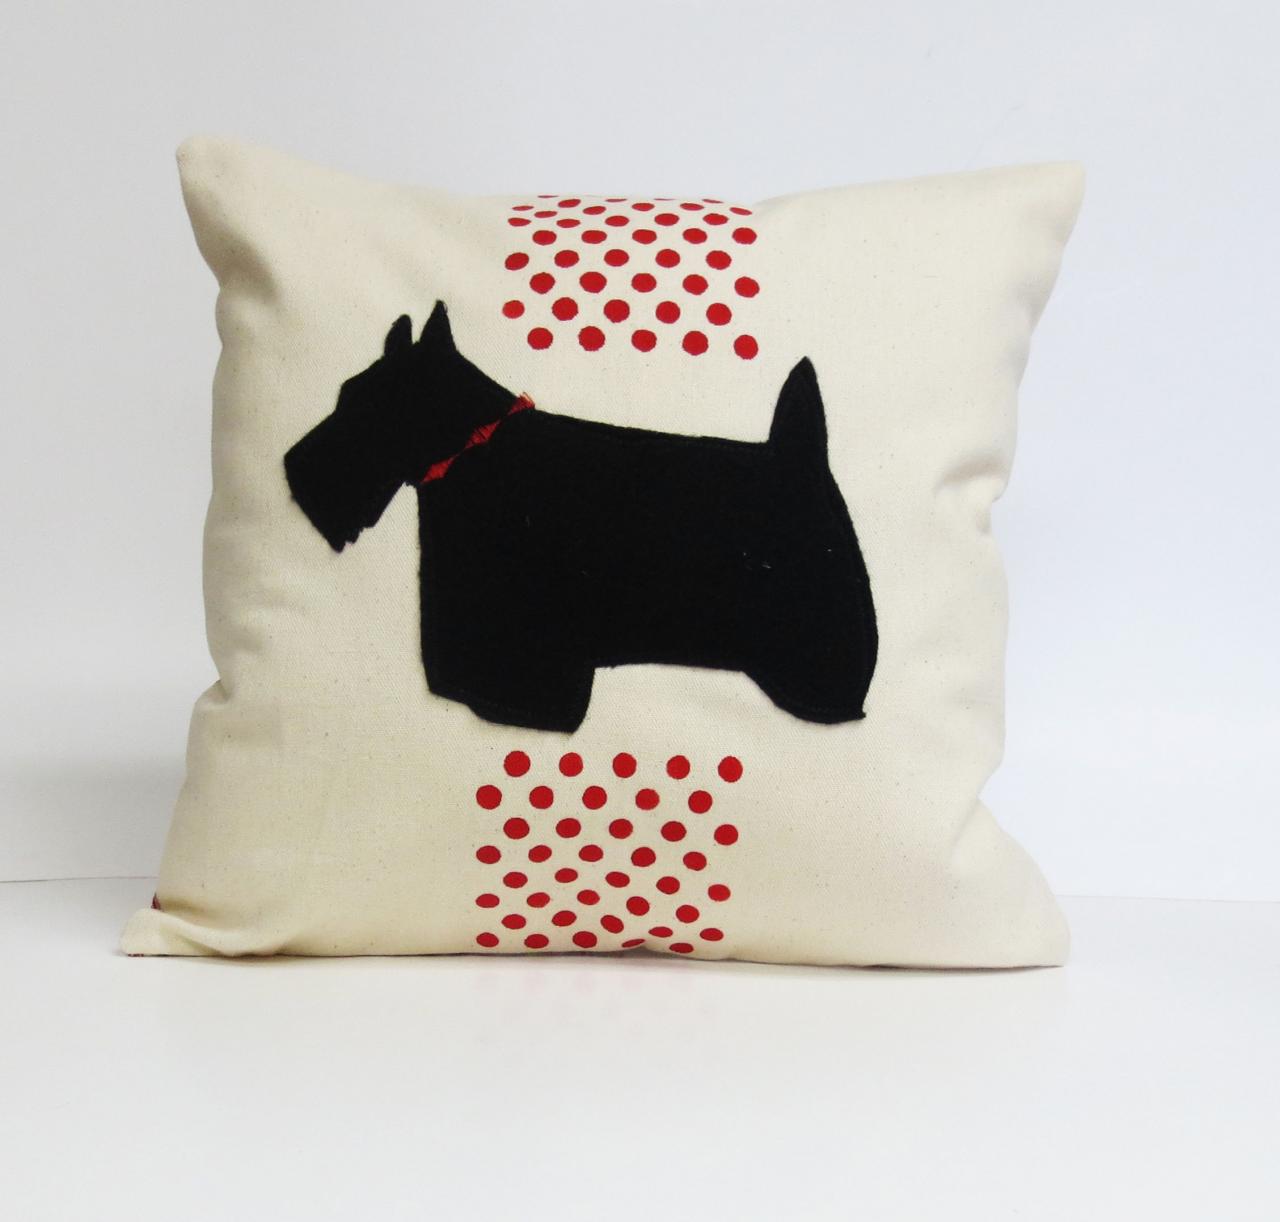 Hand Printed Polka Dot Pillow Cover With Scottie Felt Applique